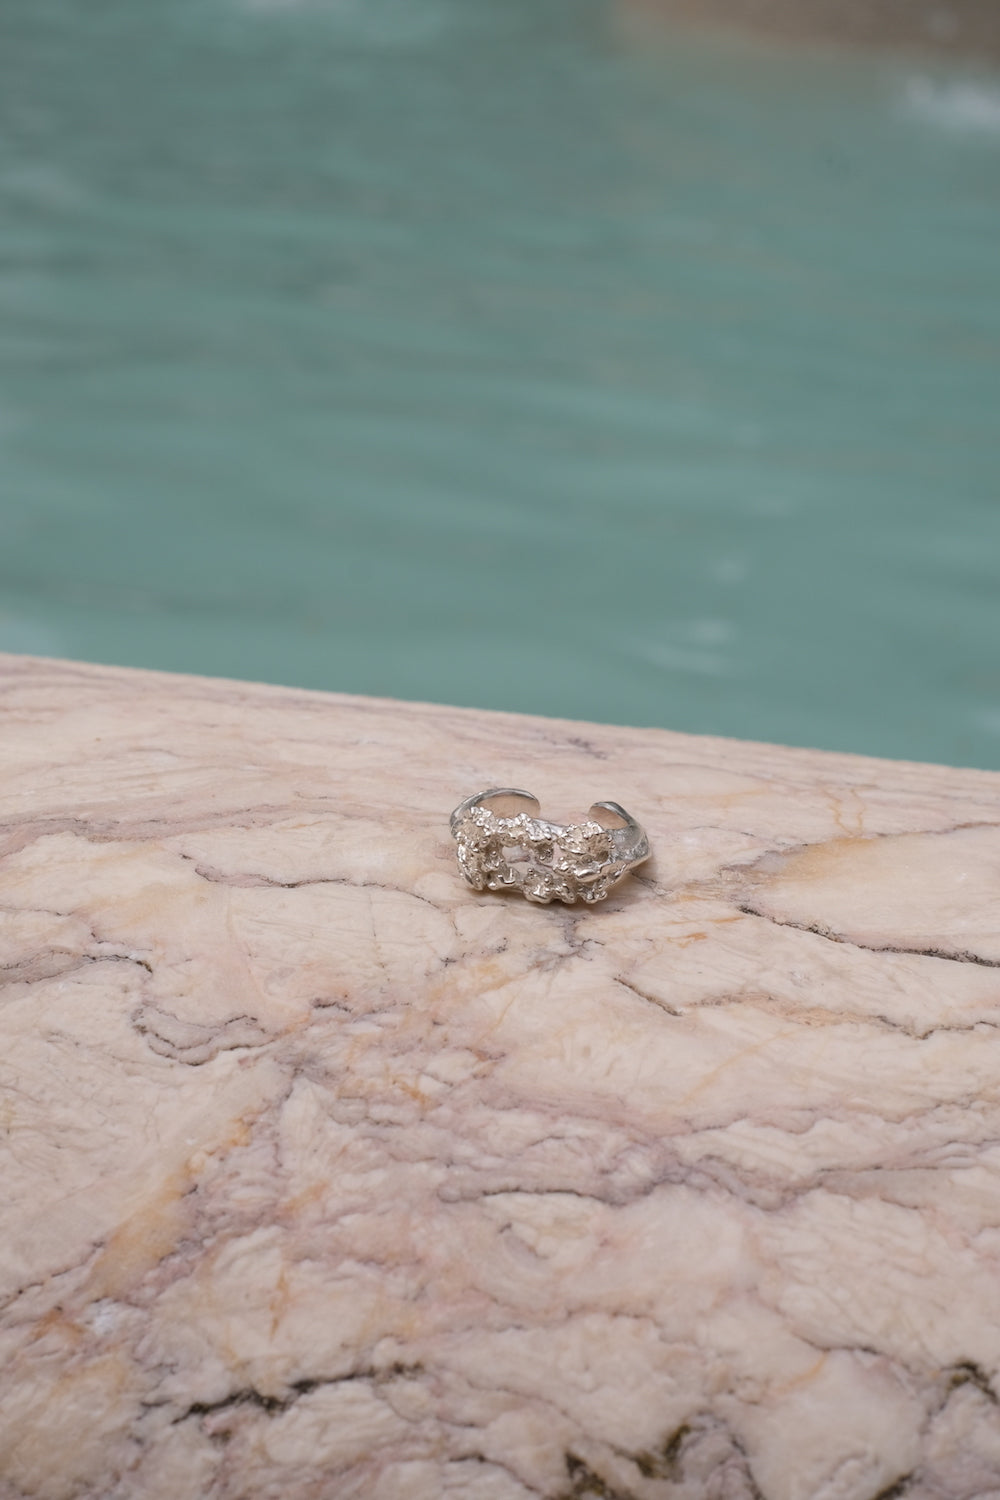 A handcrafted Glade ring by Cremilde Bispo Jewellery adorns a marble slab nestled in a glade beside a shimmering pool, surrounded by delicate floral foliage.